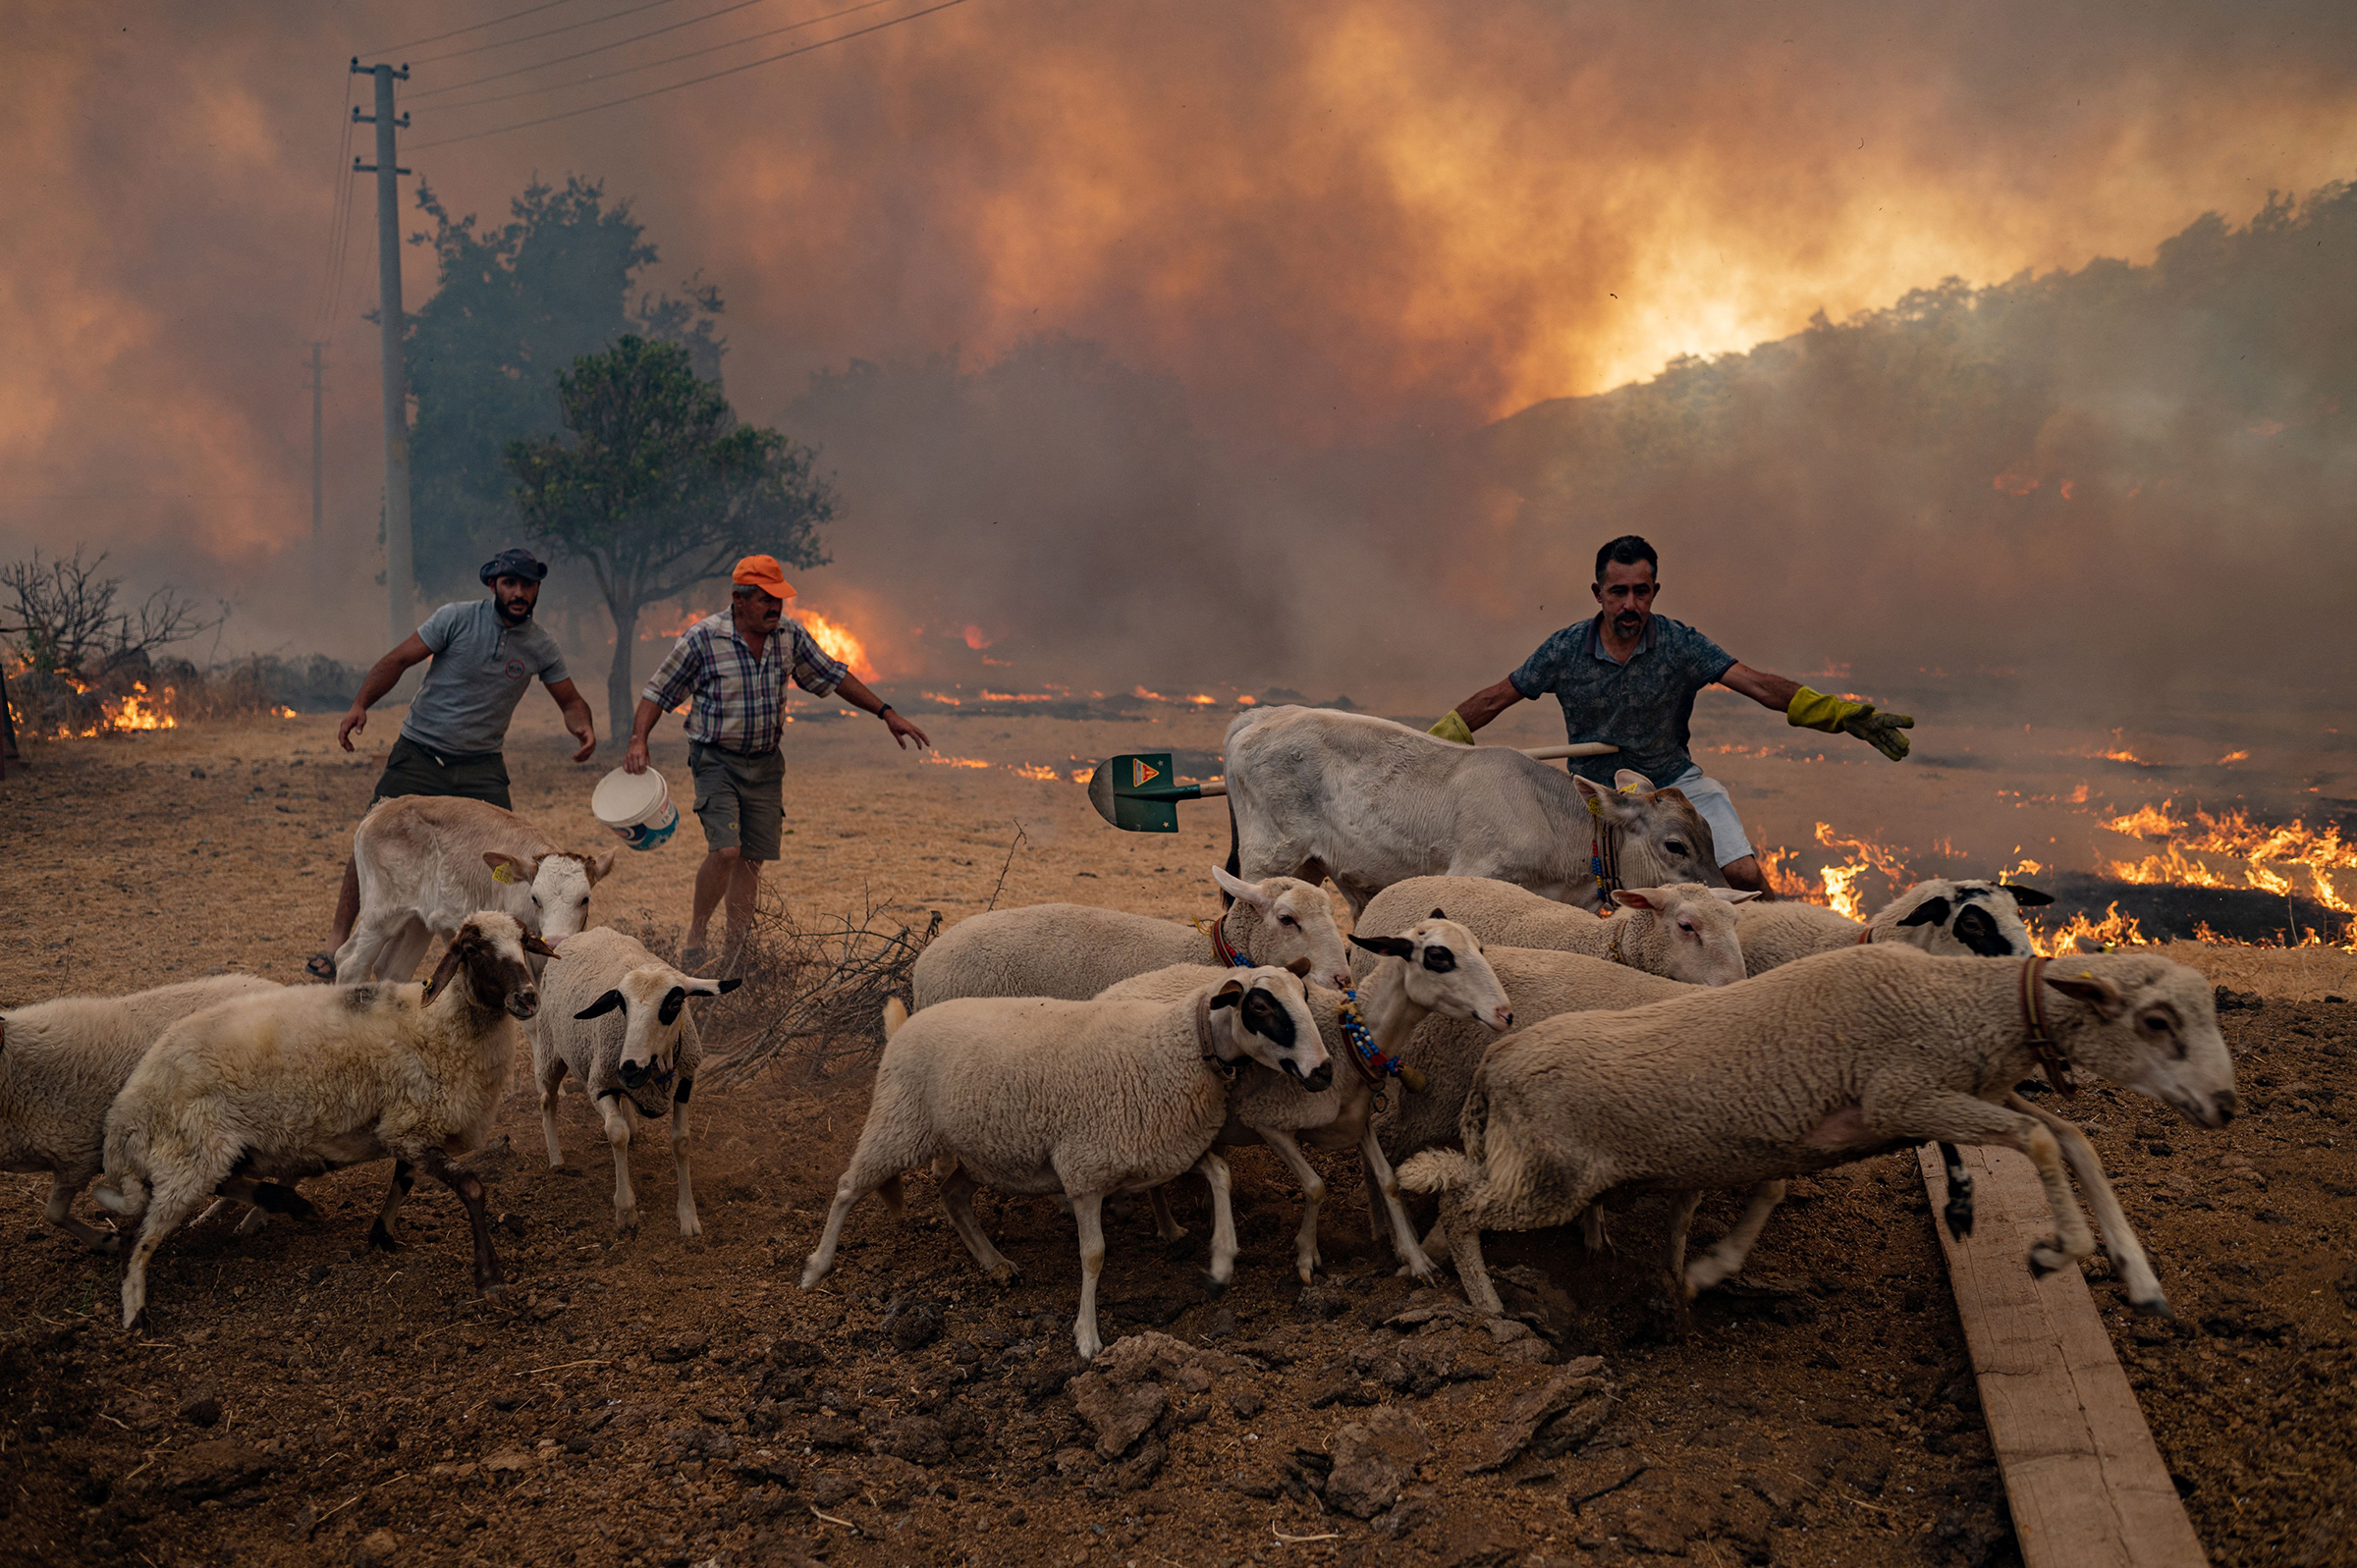 Men gather sheeps to take them away from an advancing fire in Mugla, Marmaris district, Turkey on Aug. 2. (Yasin Akgul—AFP/Getty Images)